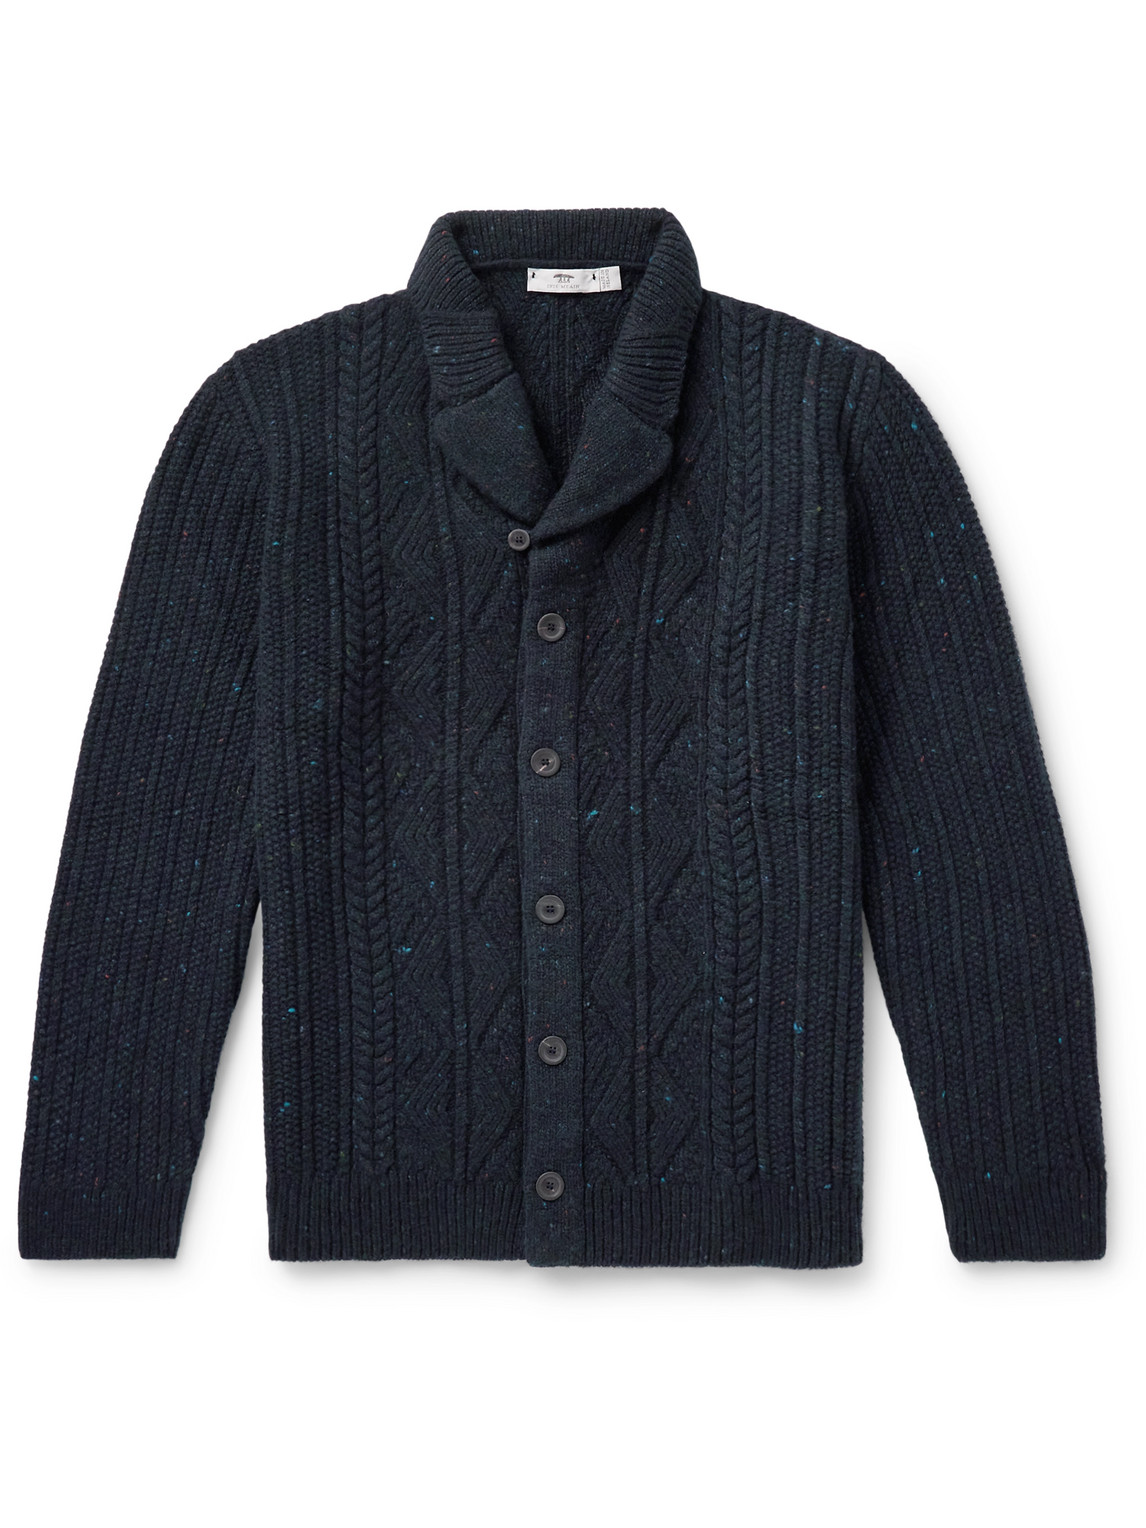 Inis Meáin Shawl-Collar Cable-Knit Donegal Merino Wool and Cashmere-Blend Cardigan